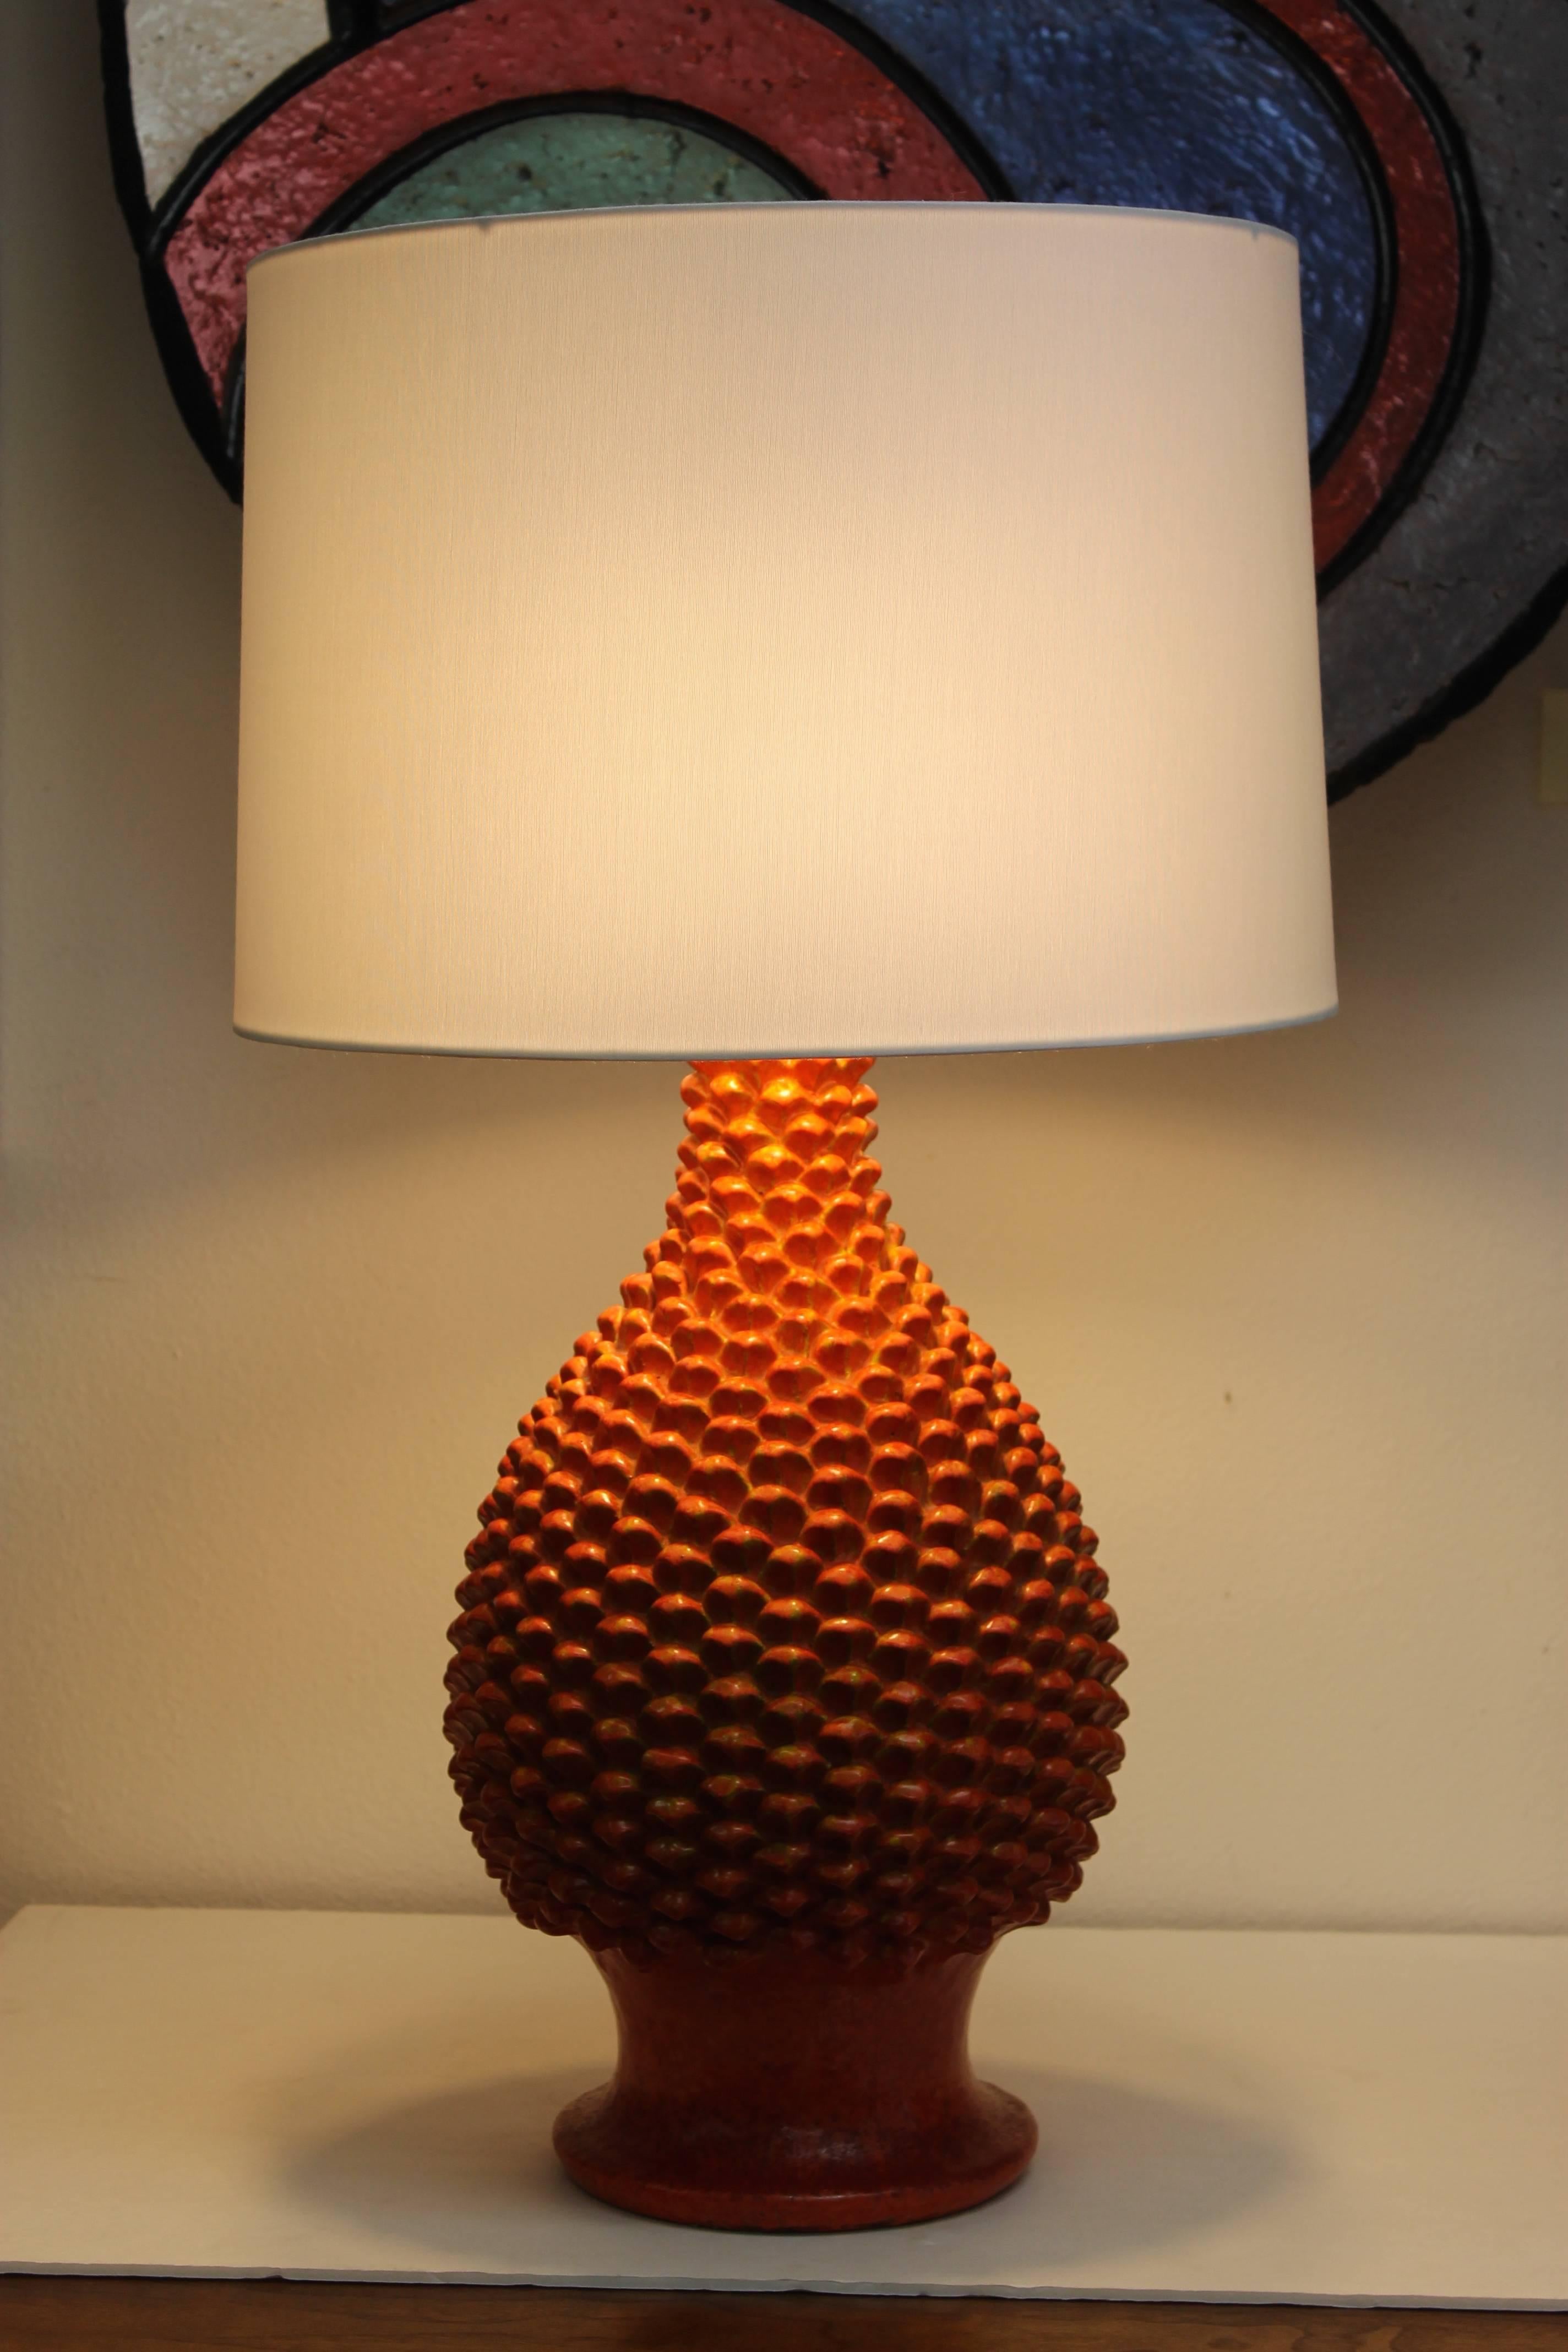 Ceramic orange drip glaze lamp designed by Marcello Fantoni (1915-2011). Signed on base. Ceramic portion is 17" high and 10" diameter. Base is 7.25" diameter. Total height from base to the bottom of socket is 26".  Lamp shade not